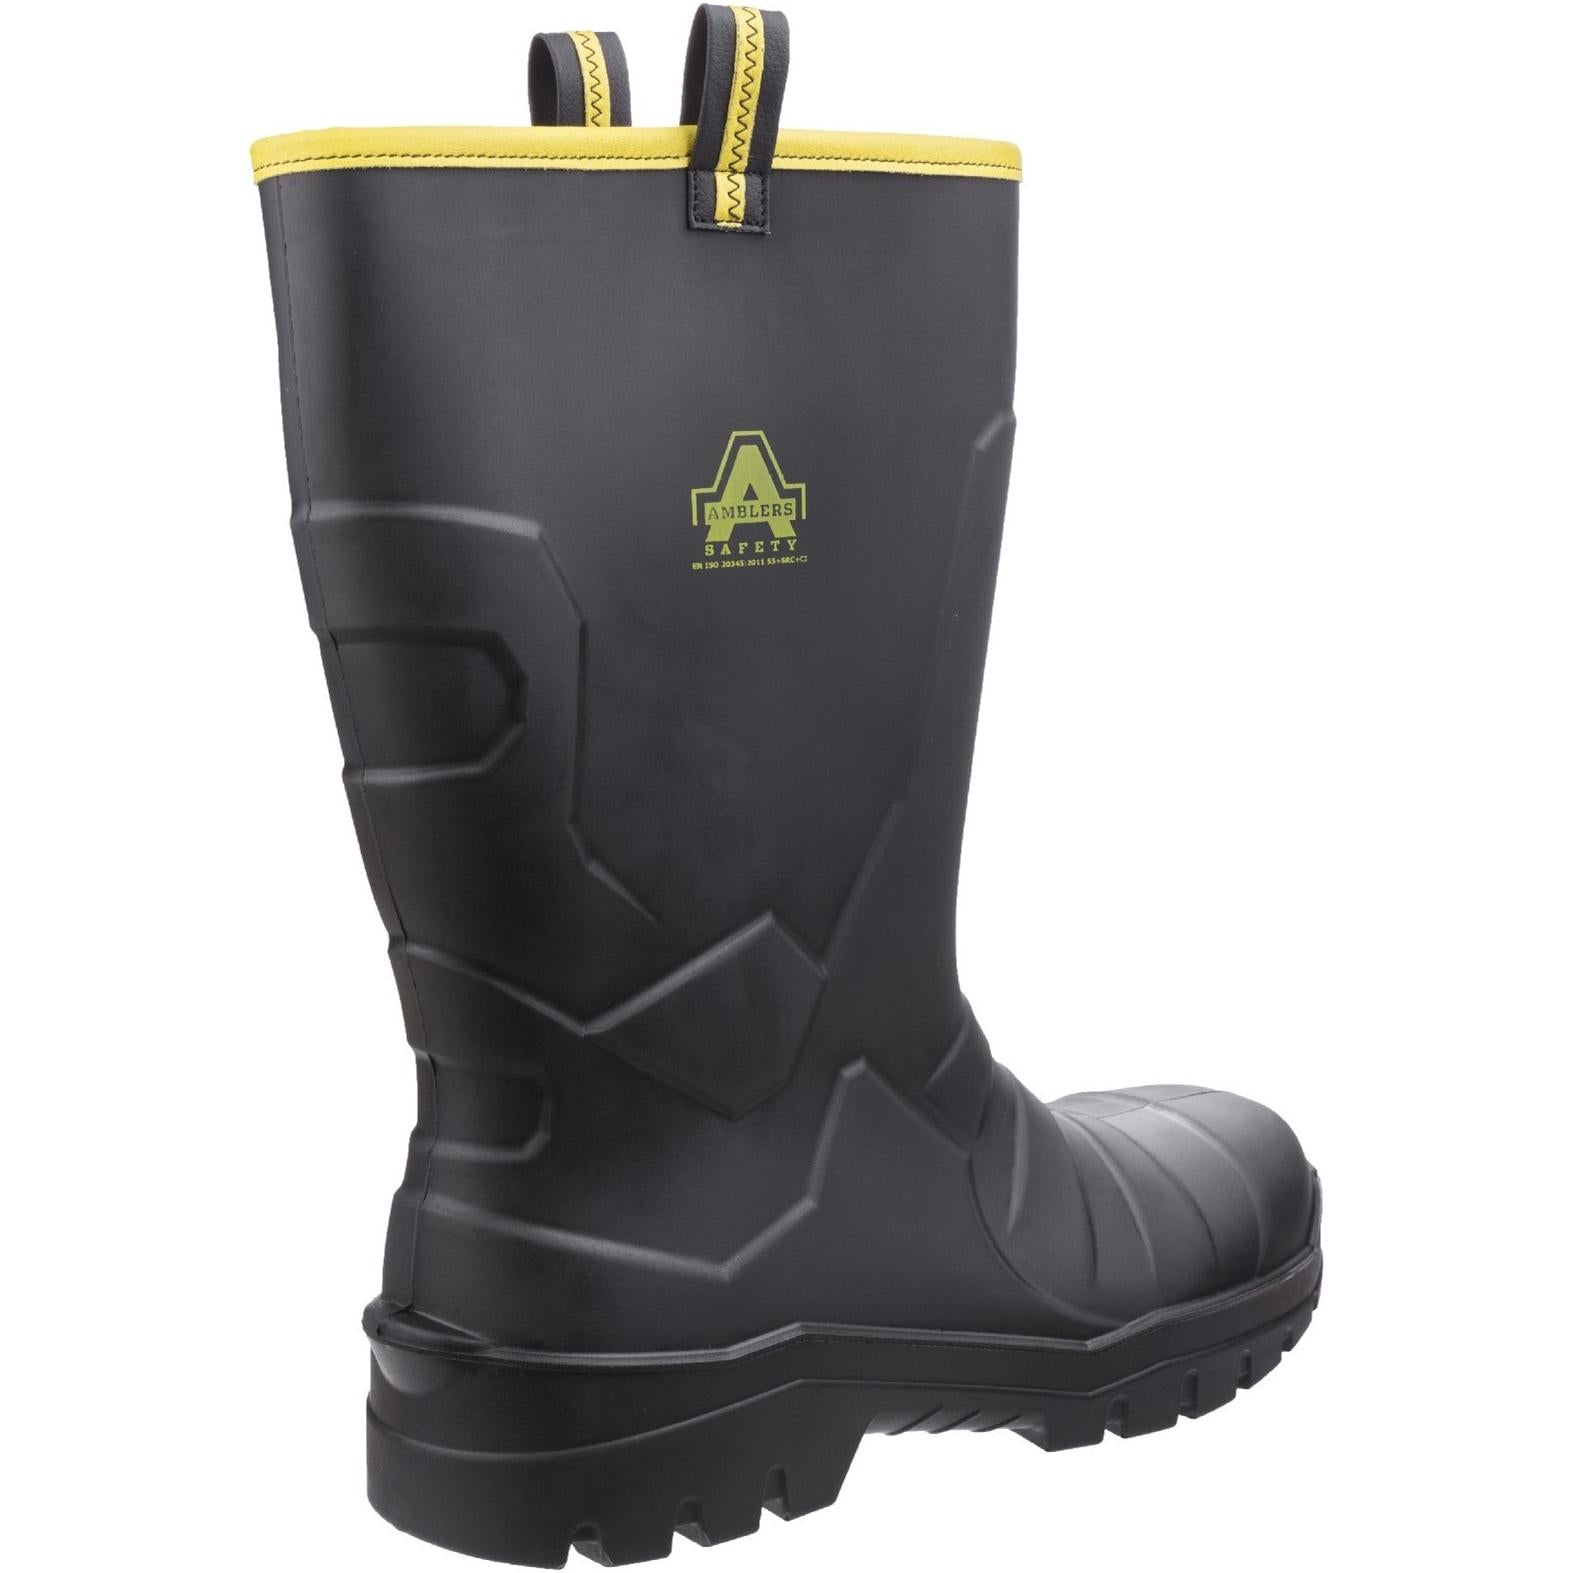 Amblers AS1008 Full Safety Rigger Boot